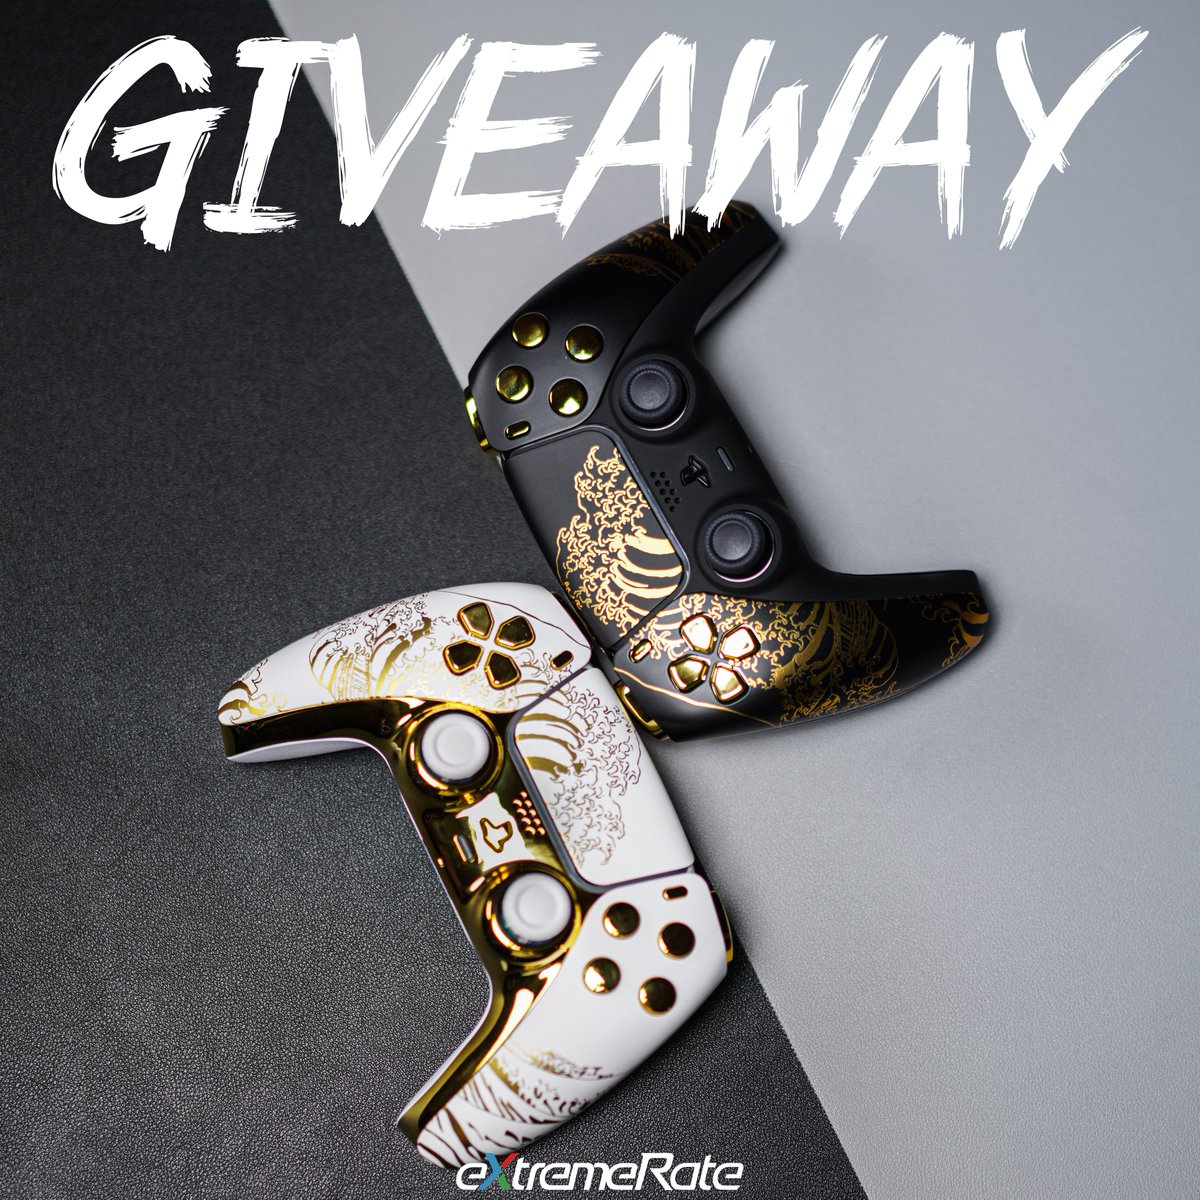 New #GIVEAWAY! ⚫🟡Noble black gold or ⚪🟡Holy white gold? ⚔️Choose your preferred controller color and fight for your camp for a chance to win fabulous prizes! 𝑨𝒍𝒍 𝒚𝒐𝒖 𝒉𝒂𝒗𝒆 𝒕𝒐 𝒅𝒐 𝒊𝒔: 1. Like/RT/Follow: @ExtremeRate 2. Vote in the comments section. 3.